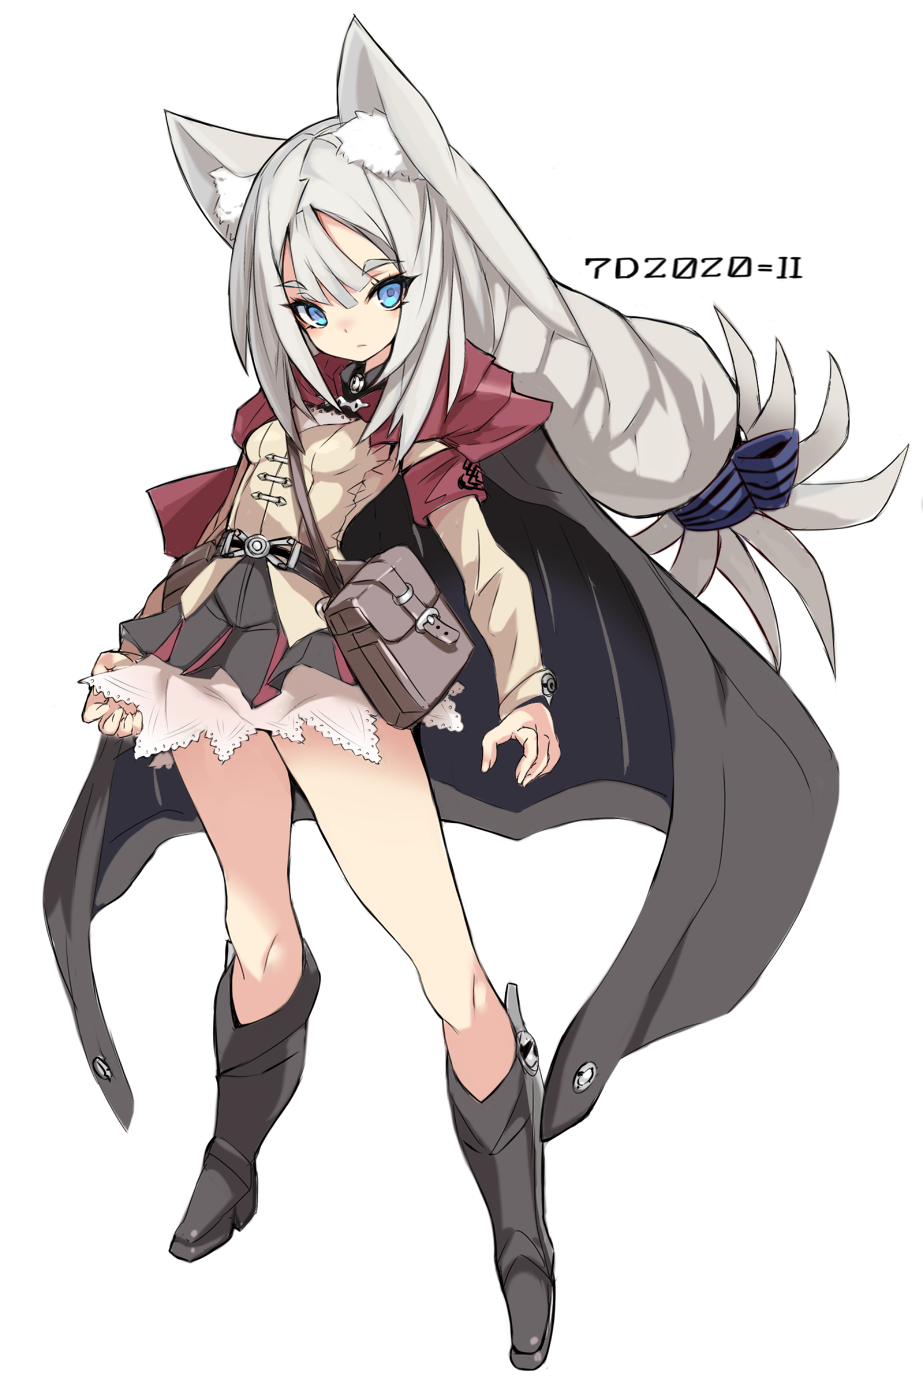 1girl 7th_dragon_(series) 7th_dragon_2020-ii animal_ear_fluff animal_ears armband bangs black_cape black_footwear black_skirt blue_eyes boots braid breasts brown_shirt cape closed_mouth commentary_request eyebrows_visible_through_hair grey_hair highres karukan_(monjya) long_hair long_sleeves looking_at_viewer lucier_(7th_dragon) pleated_skirt shirt short_eyebrows simple_background single_braid skirt small_breasts solo thick_eyebrows very_long_hair white_background